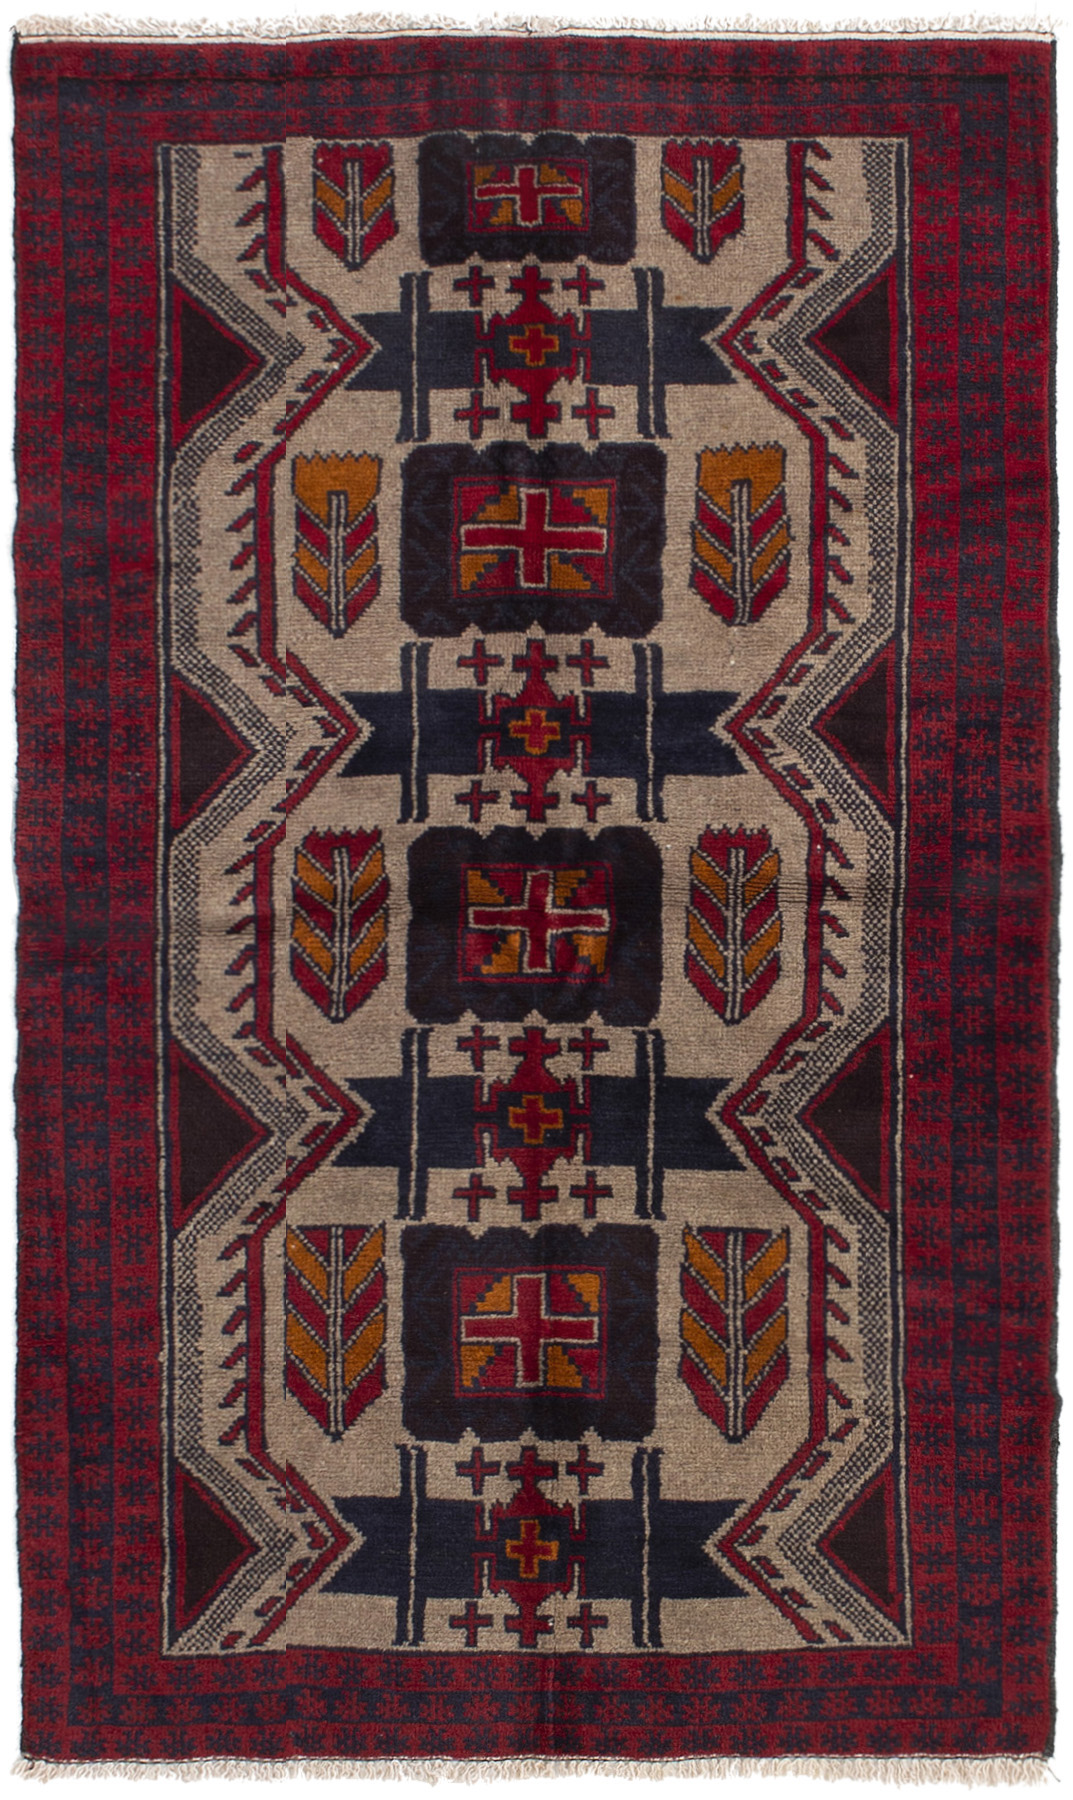 Hand-knotted Teimani Red, Tan Wool Rug 3'6" x 6'1" Size: 3'6" x 6'1"  